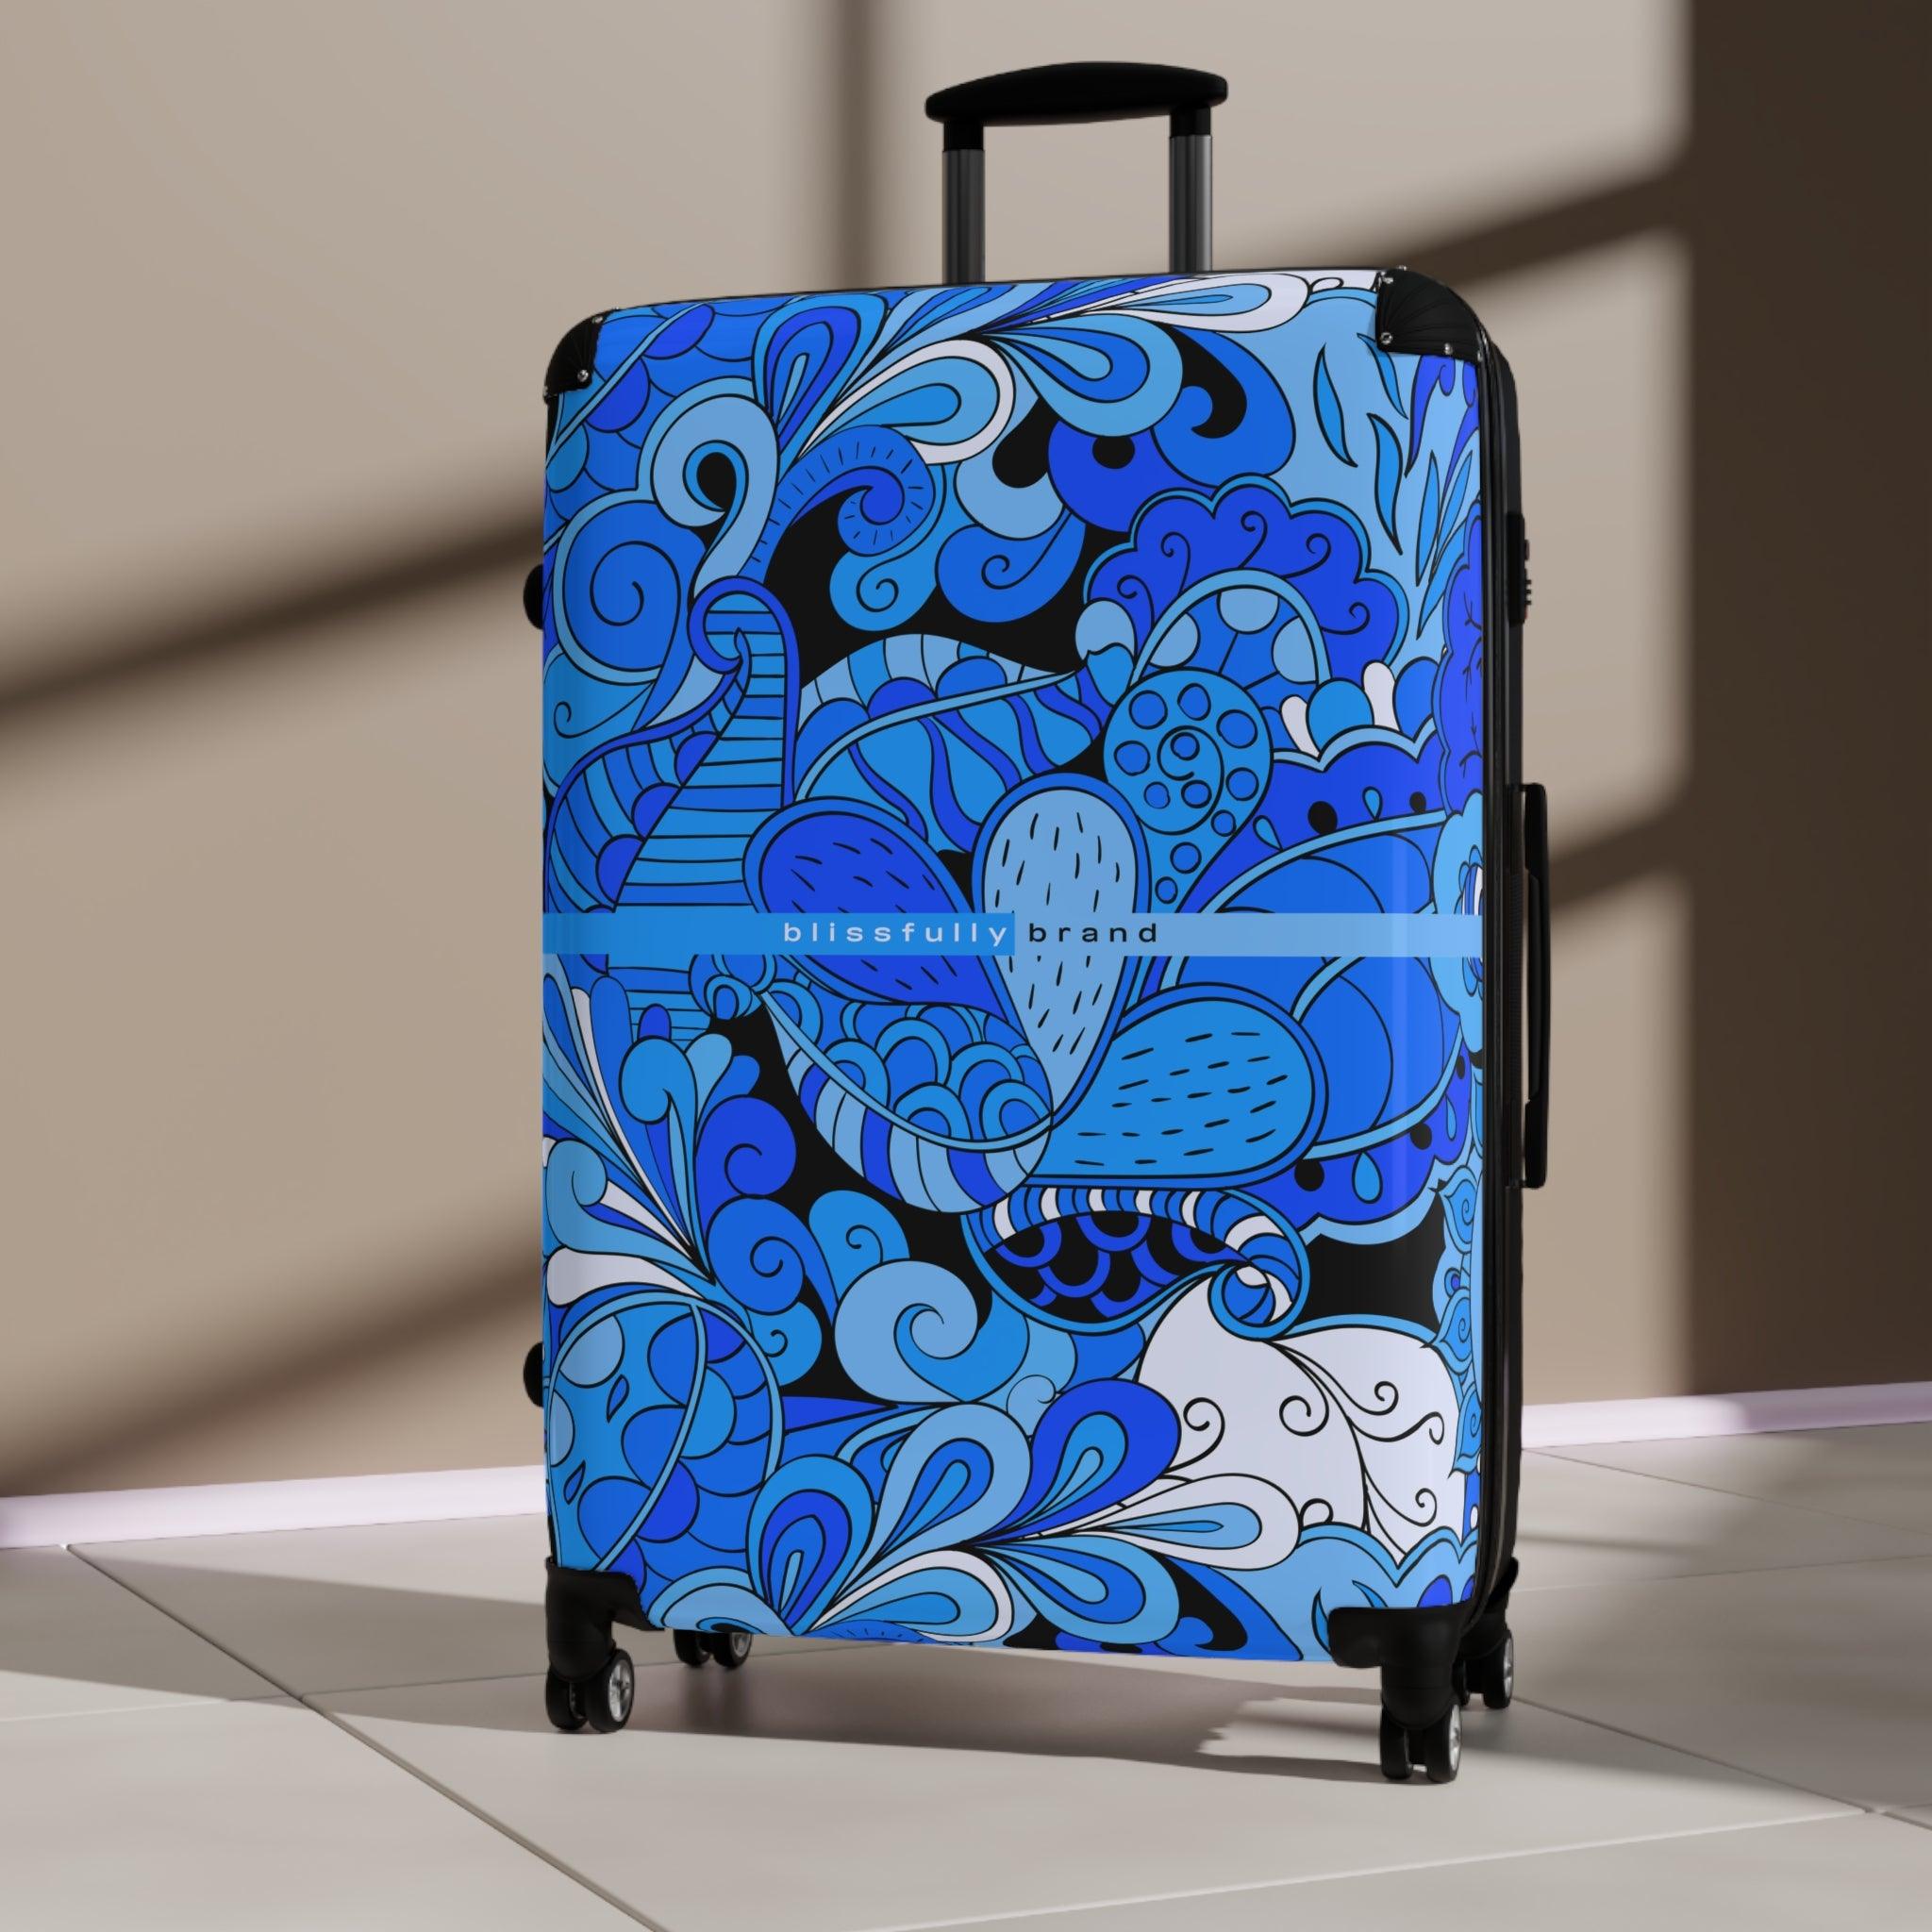 Ima Luggage Collection - Blissfully Brand